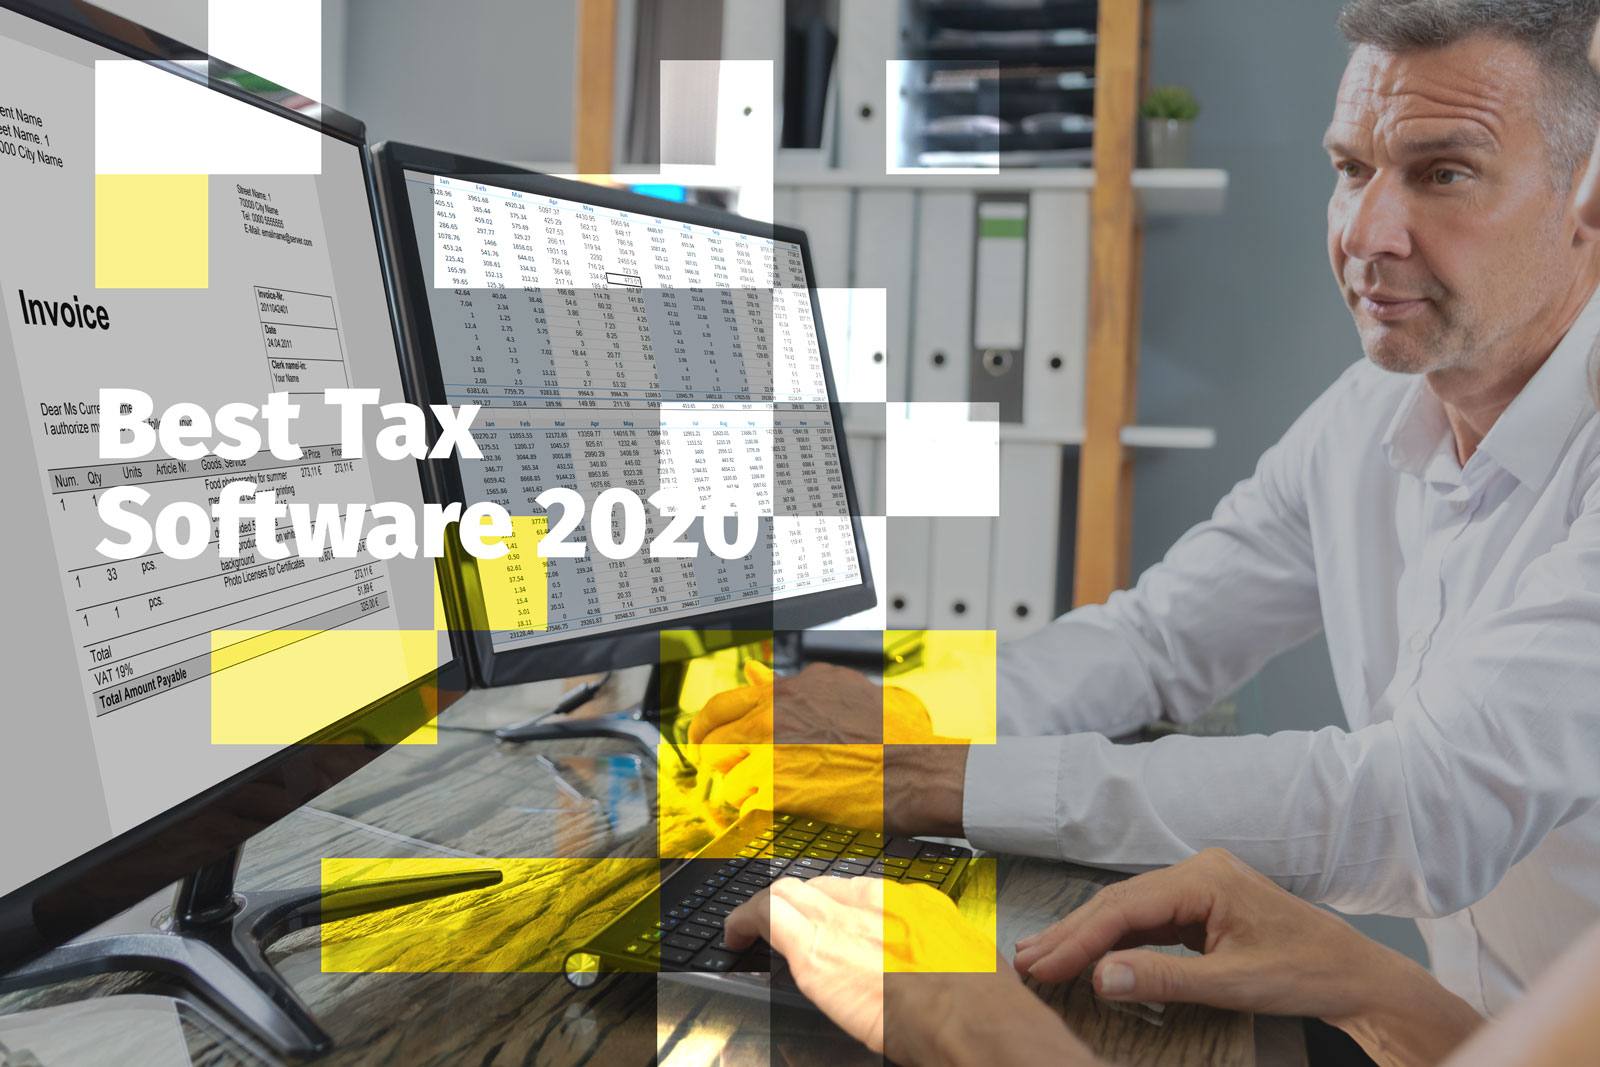 Top 6 Best Tax Software 2020 - FortySeven